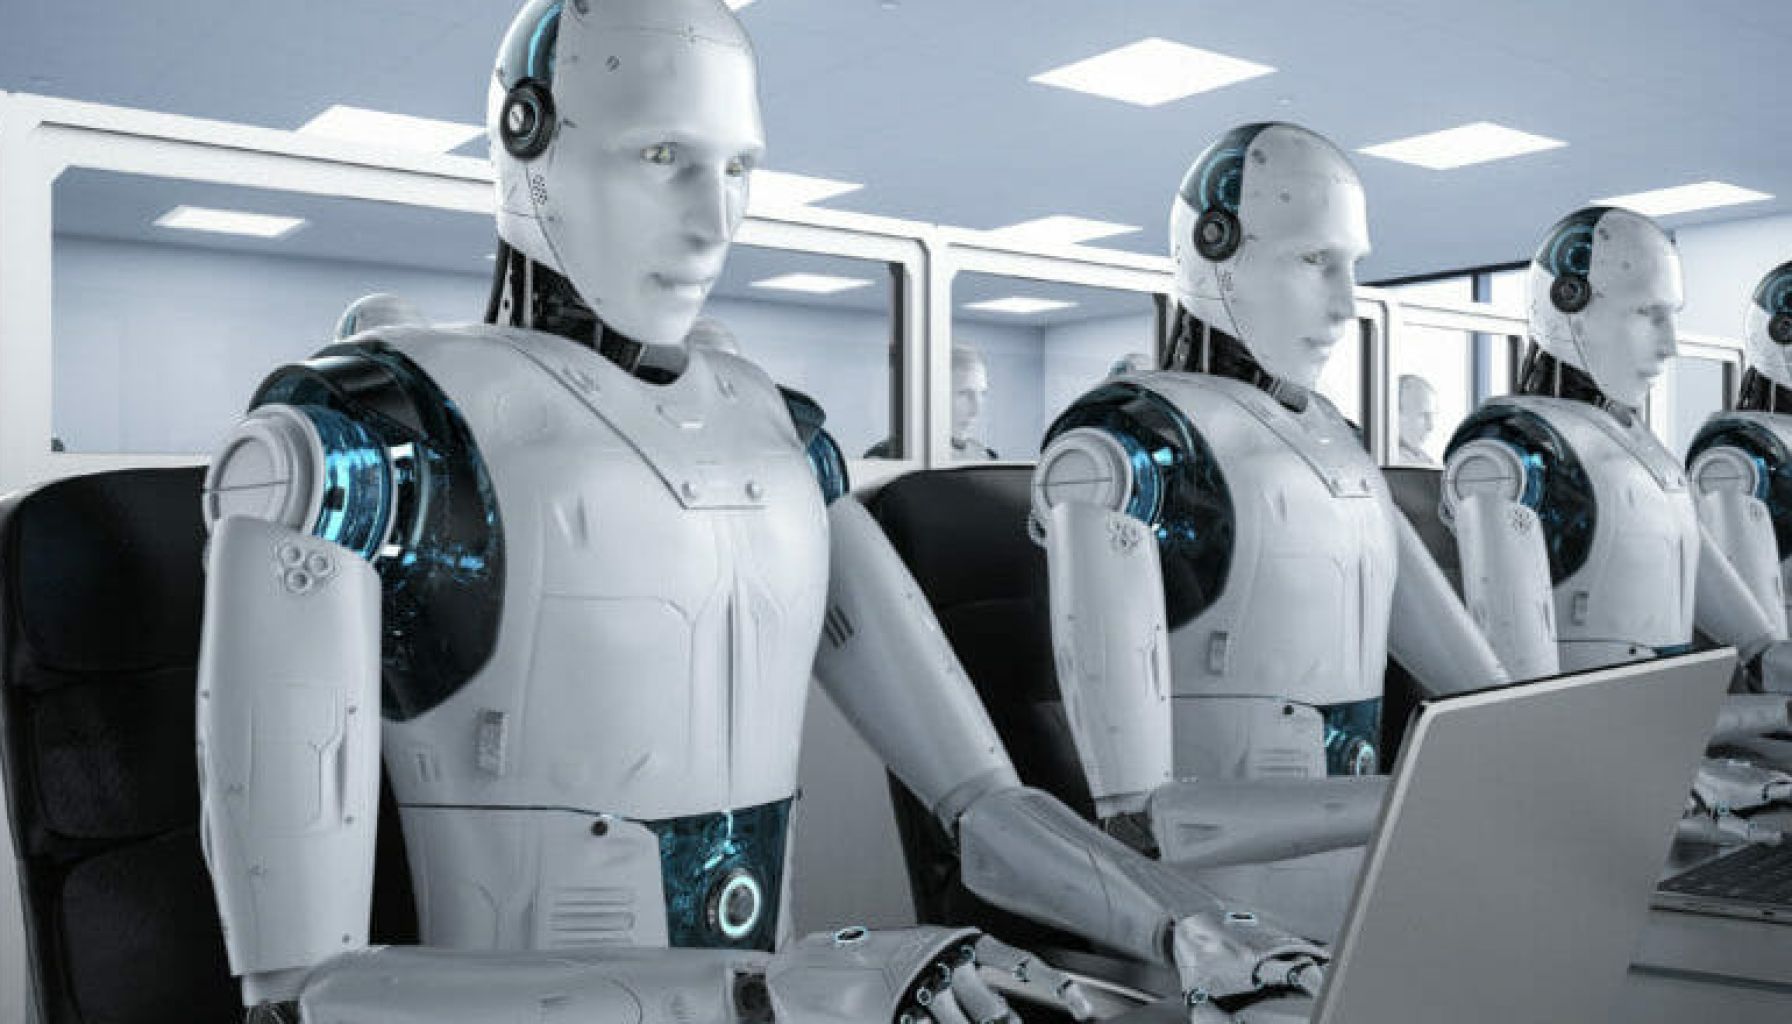 robots-more-productive-human-workers-v1-study-1005x440-1.jpg